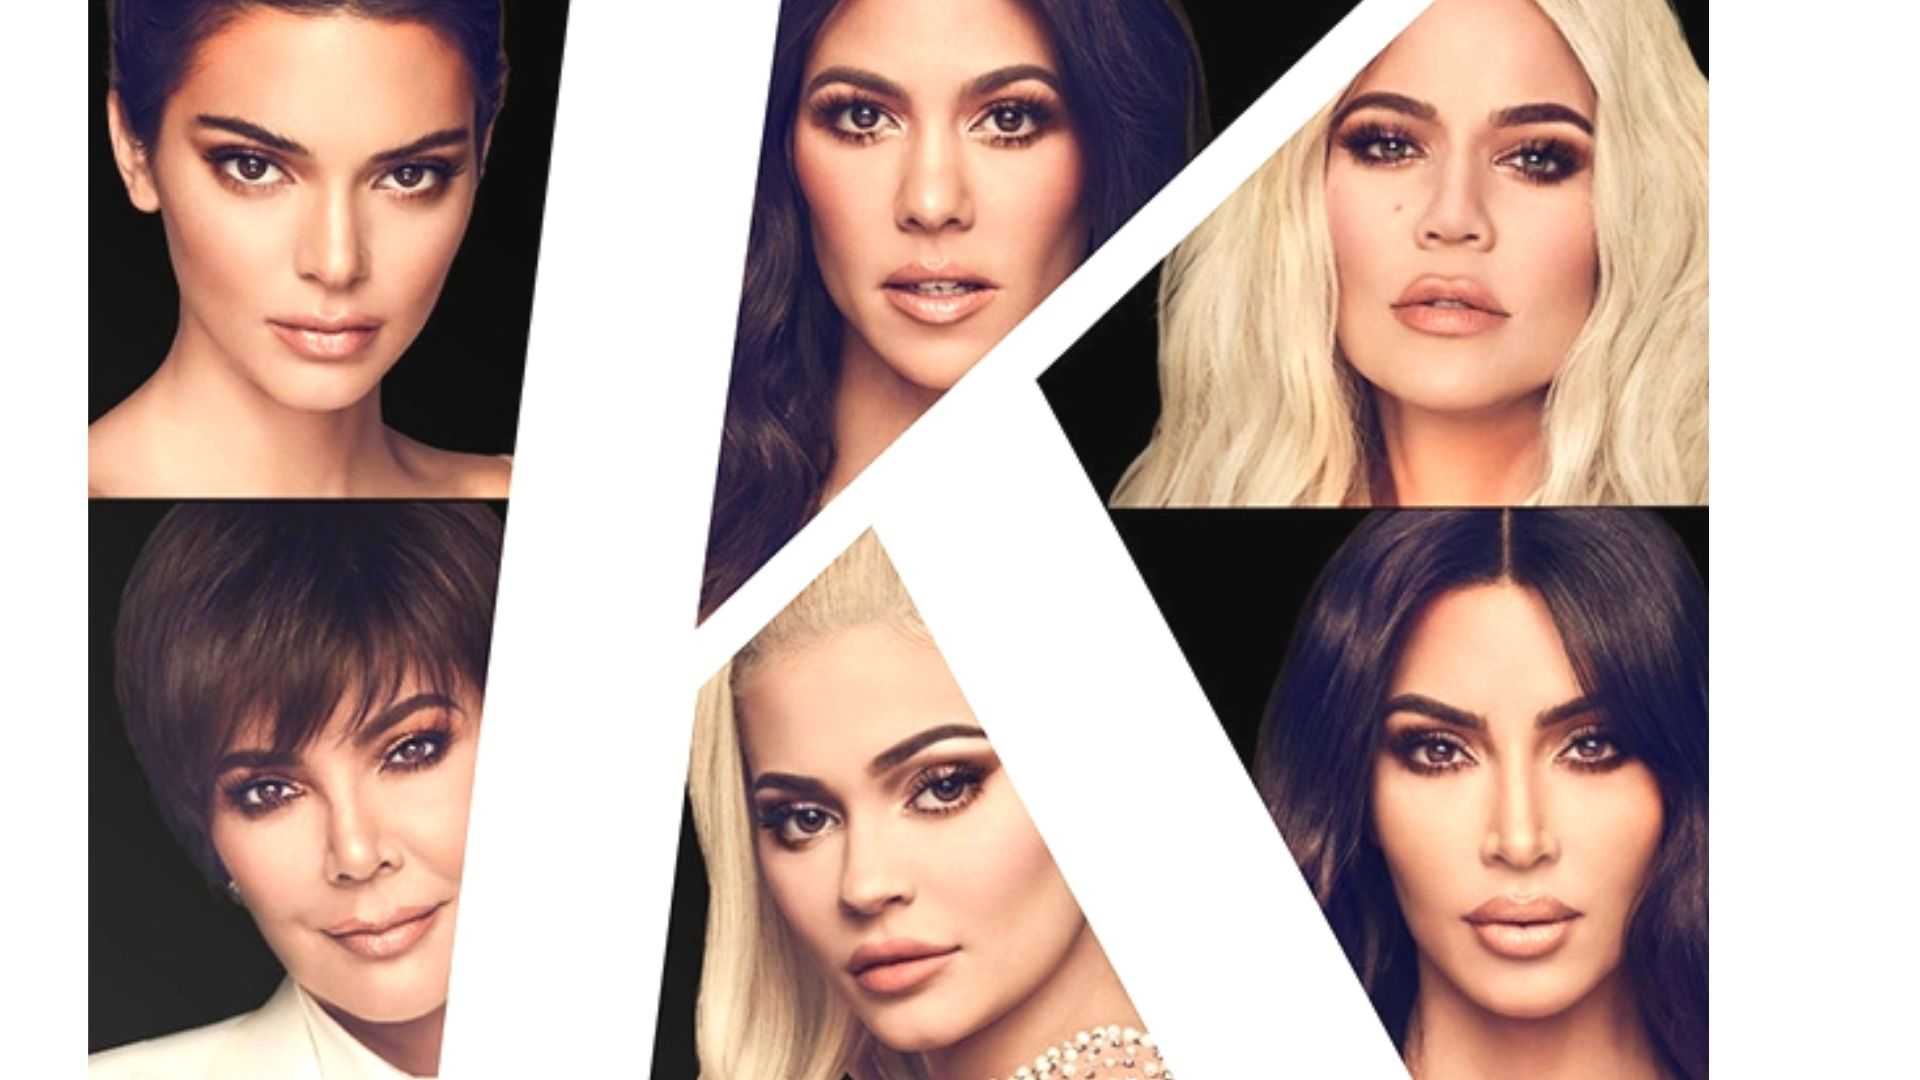 Where to watch keeping up with the Kardashians Wallpaper and images